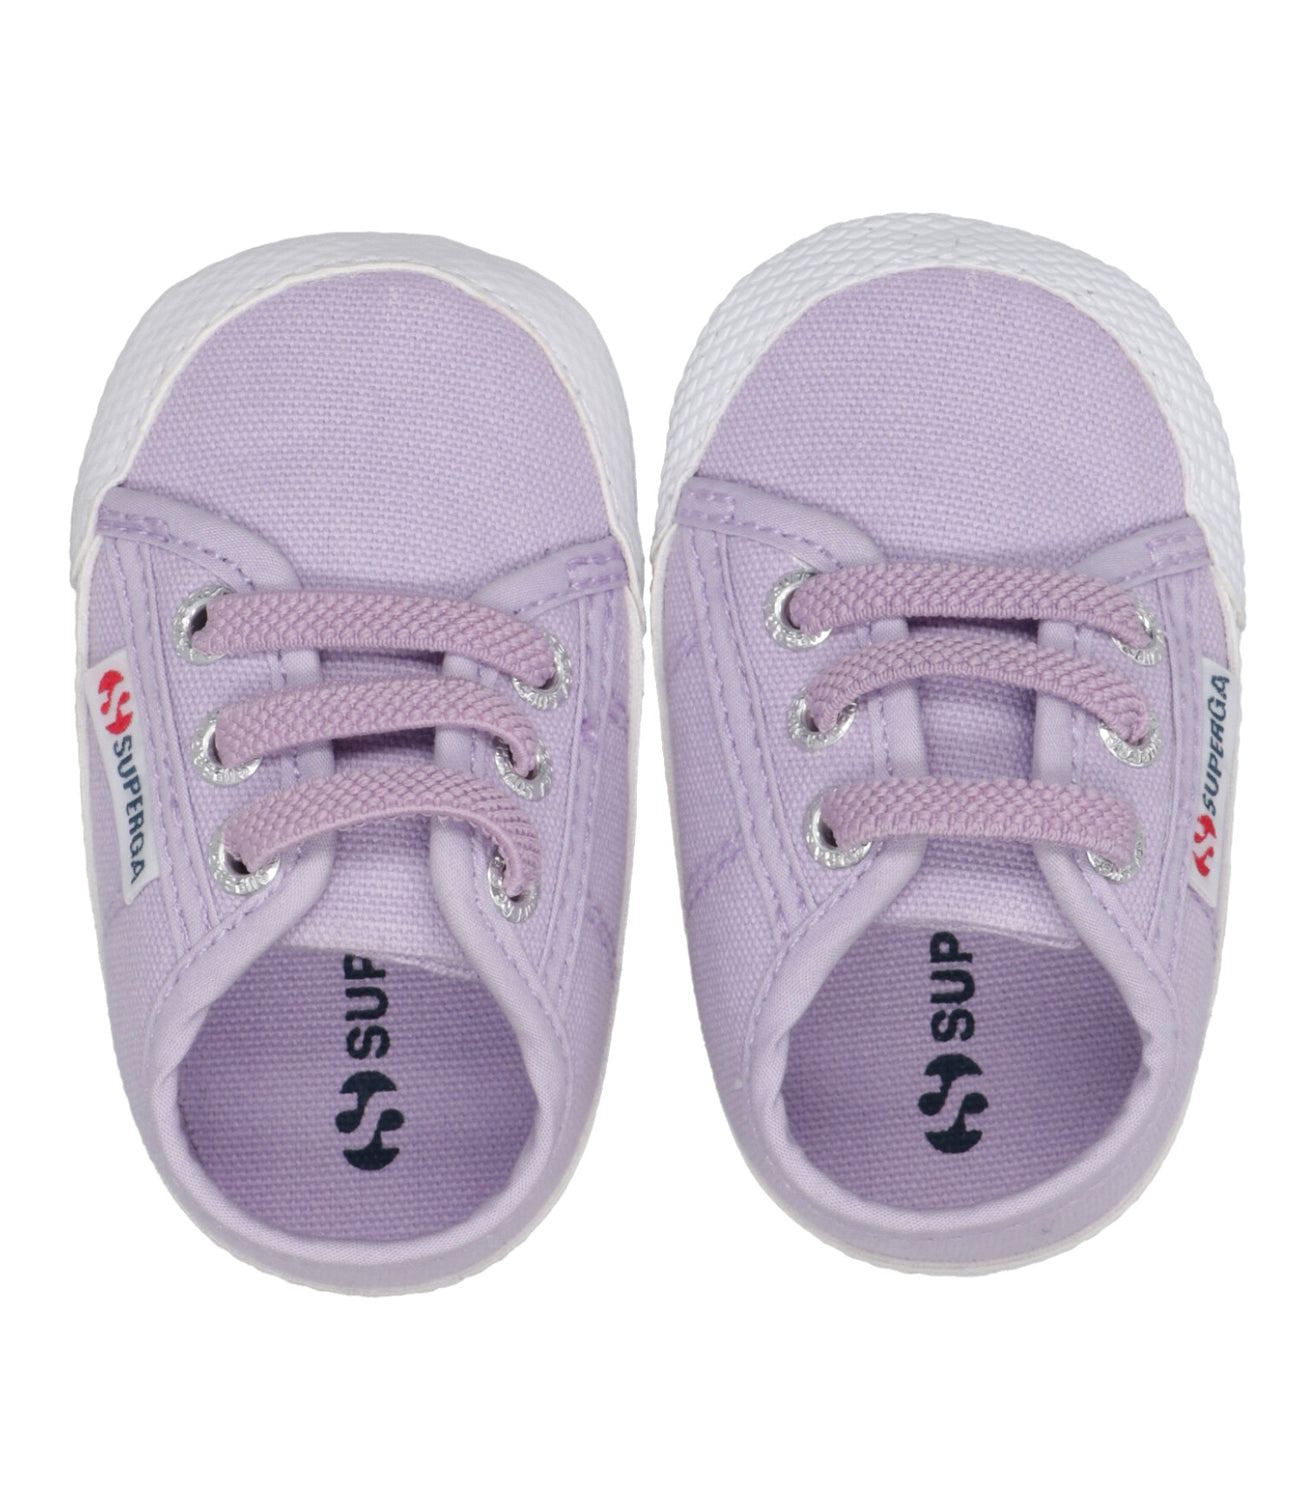 Superga Kids | Sneakers 4006 Baby Lilac